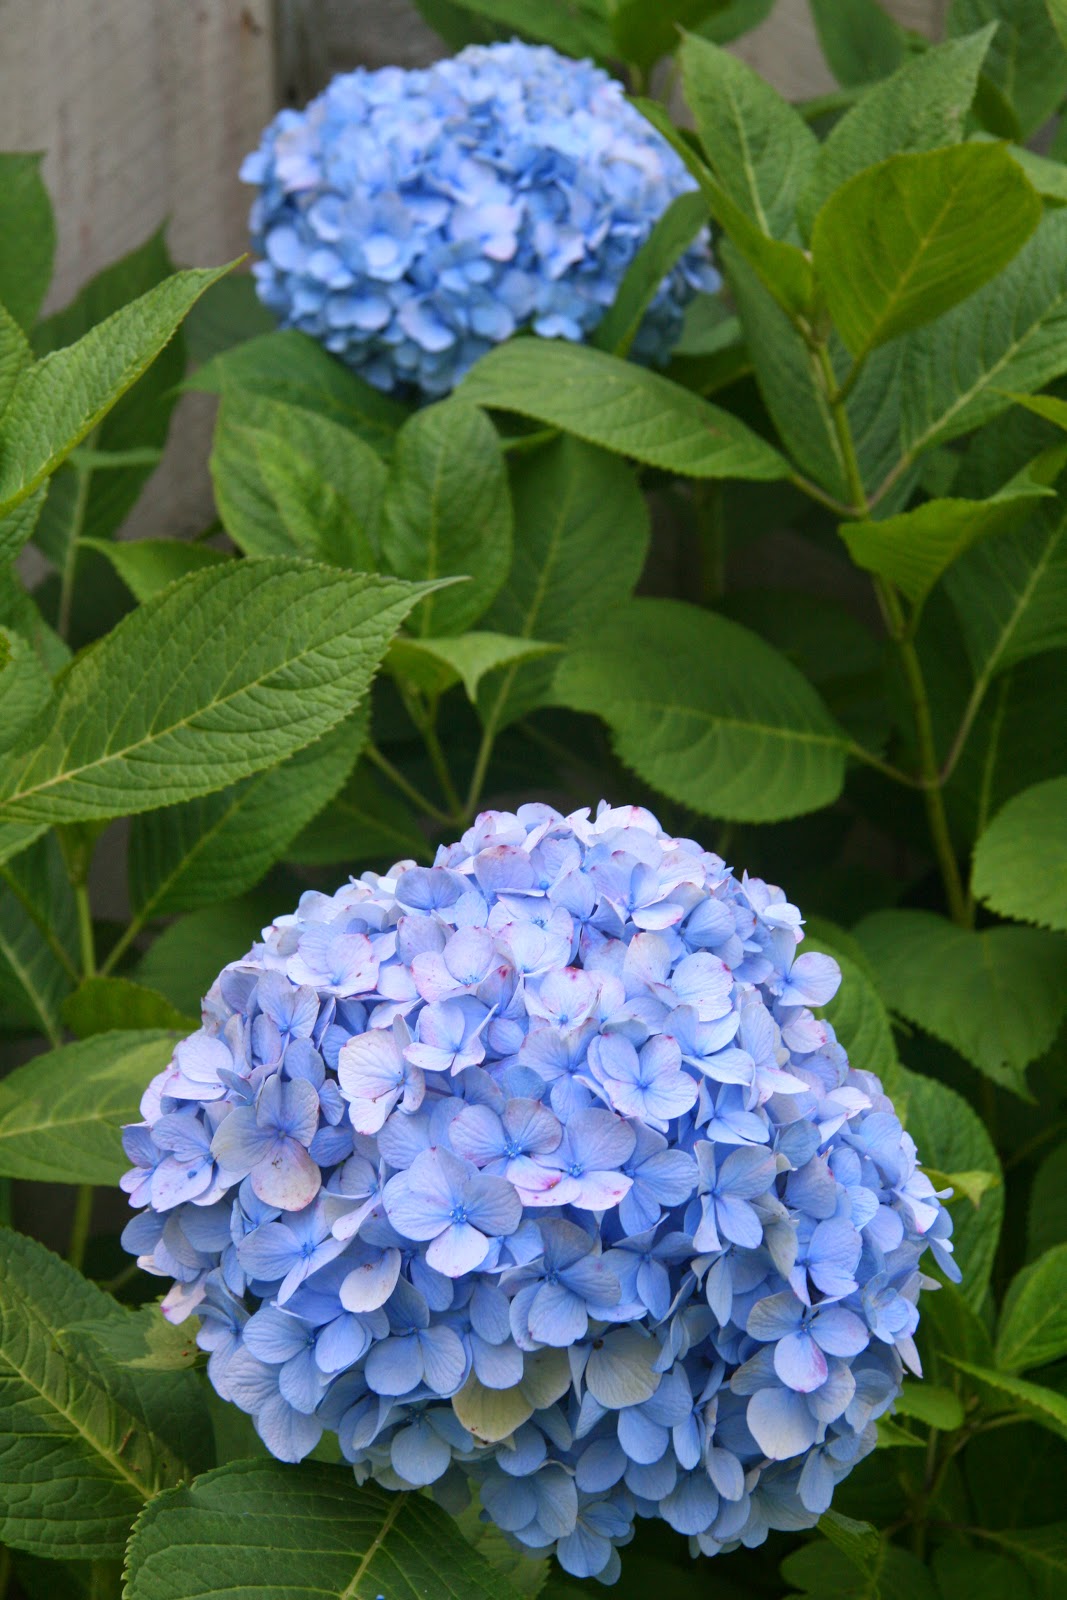 Bumble Lush Garden Hydrangeas In Bloom Endless Summer And